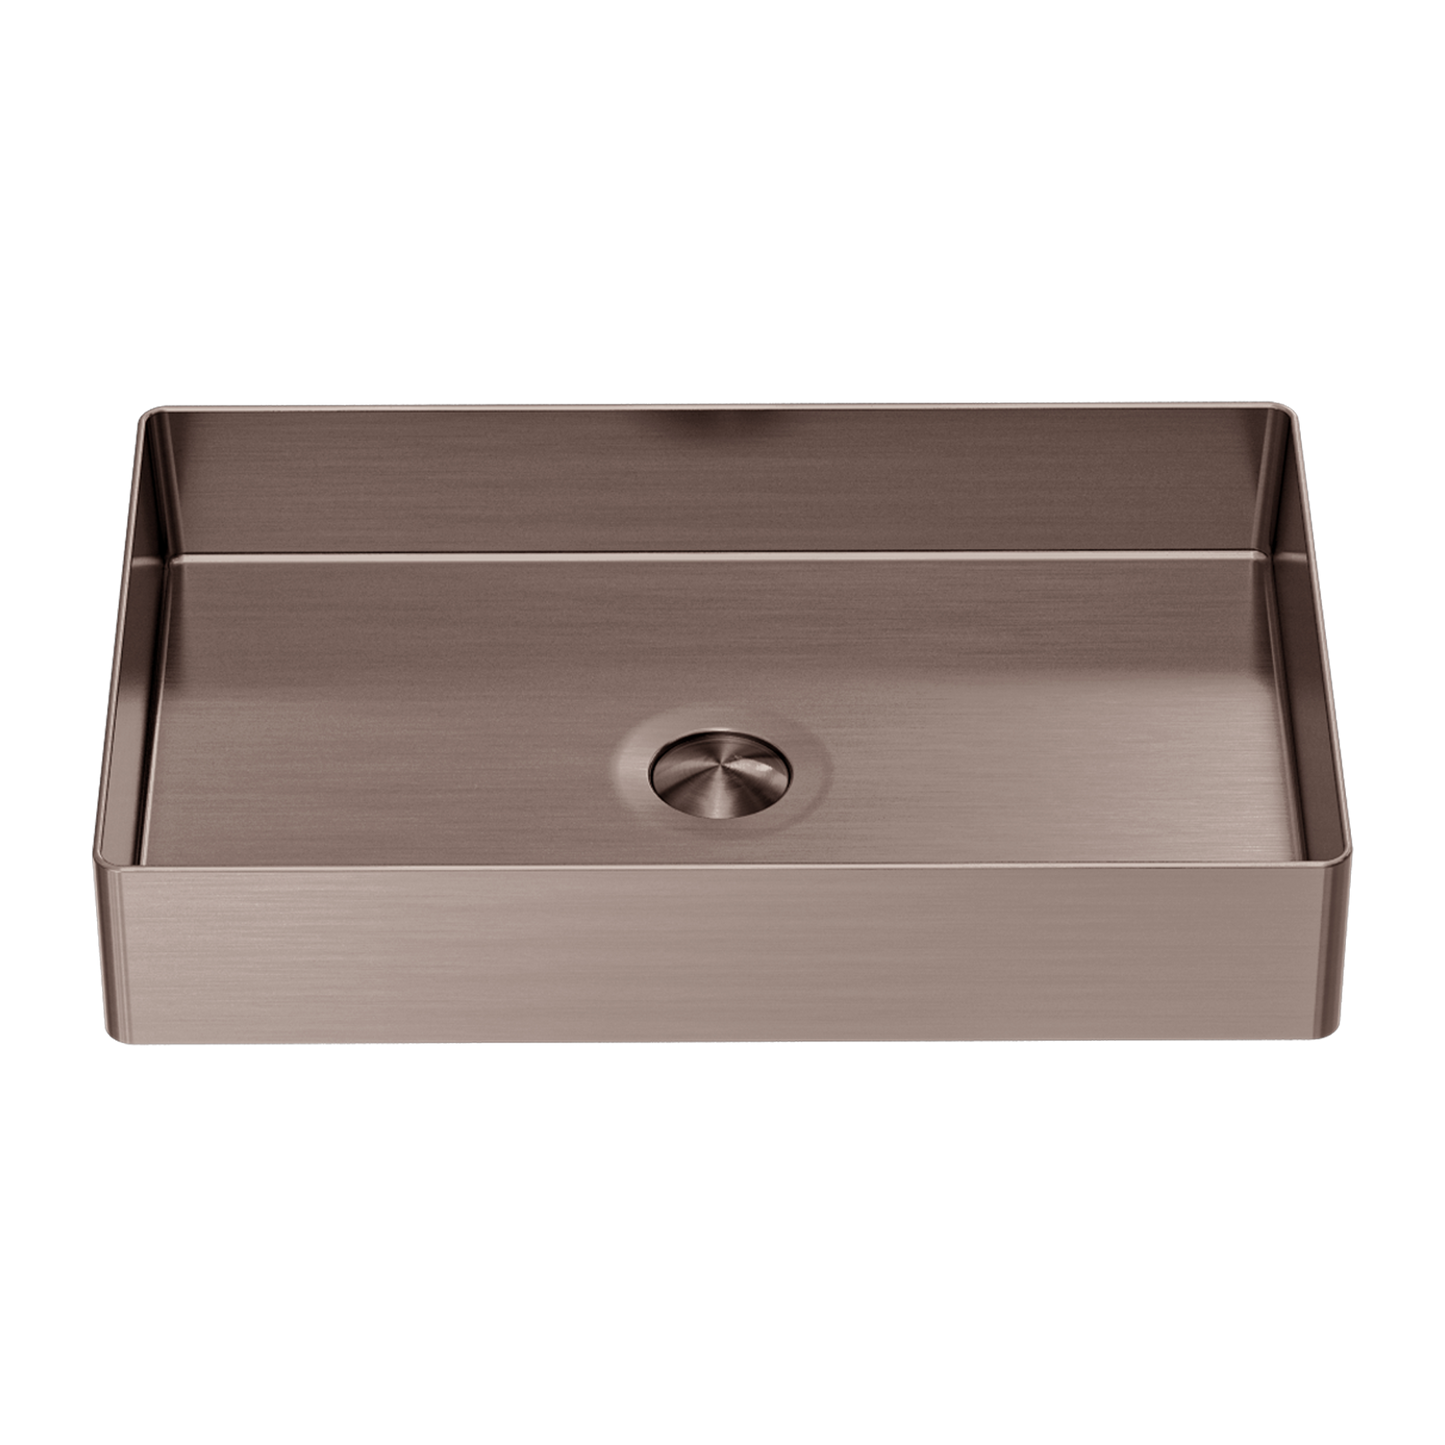 Stainless Steel Rectangle Counter Top Basin - Brushed Bronze with PVD Coating